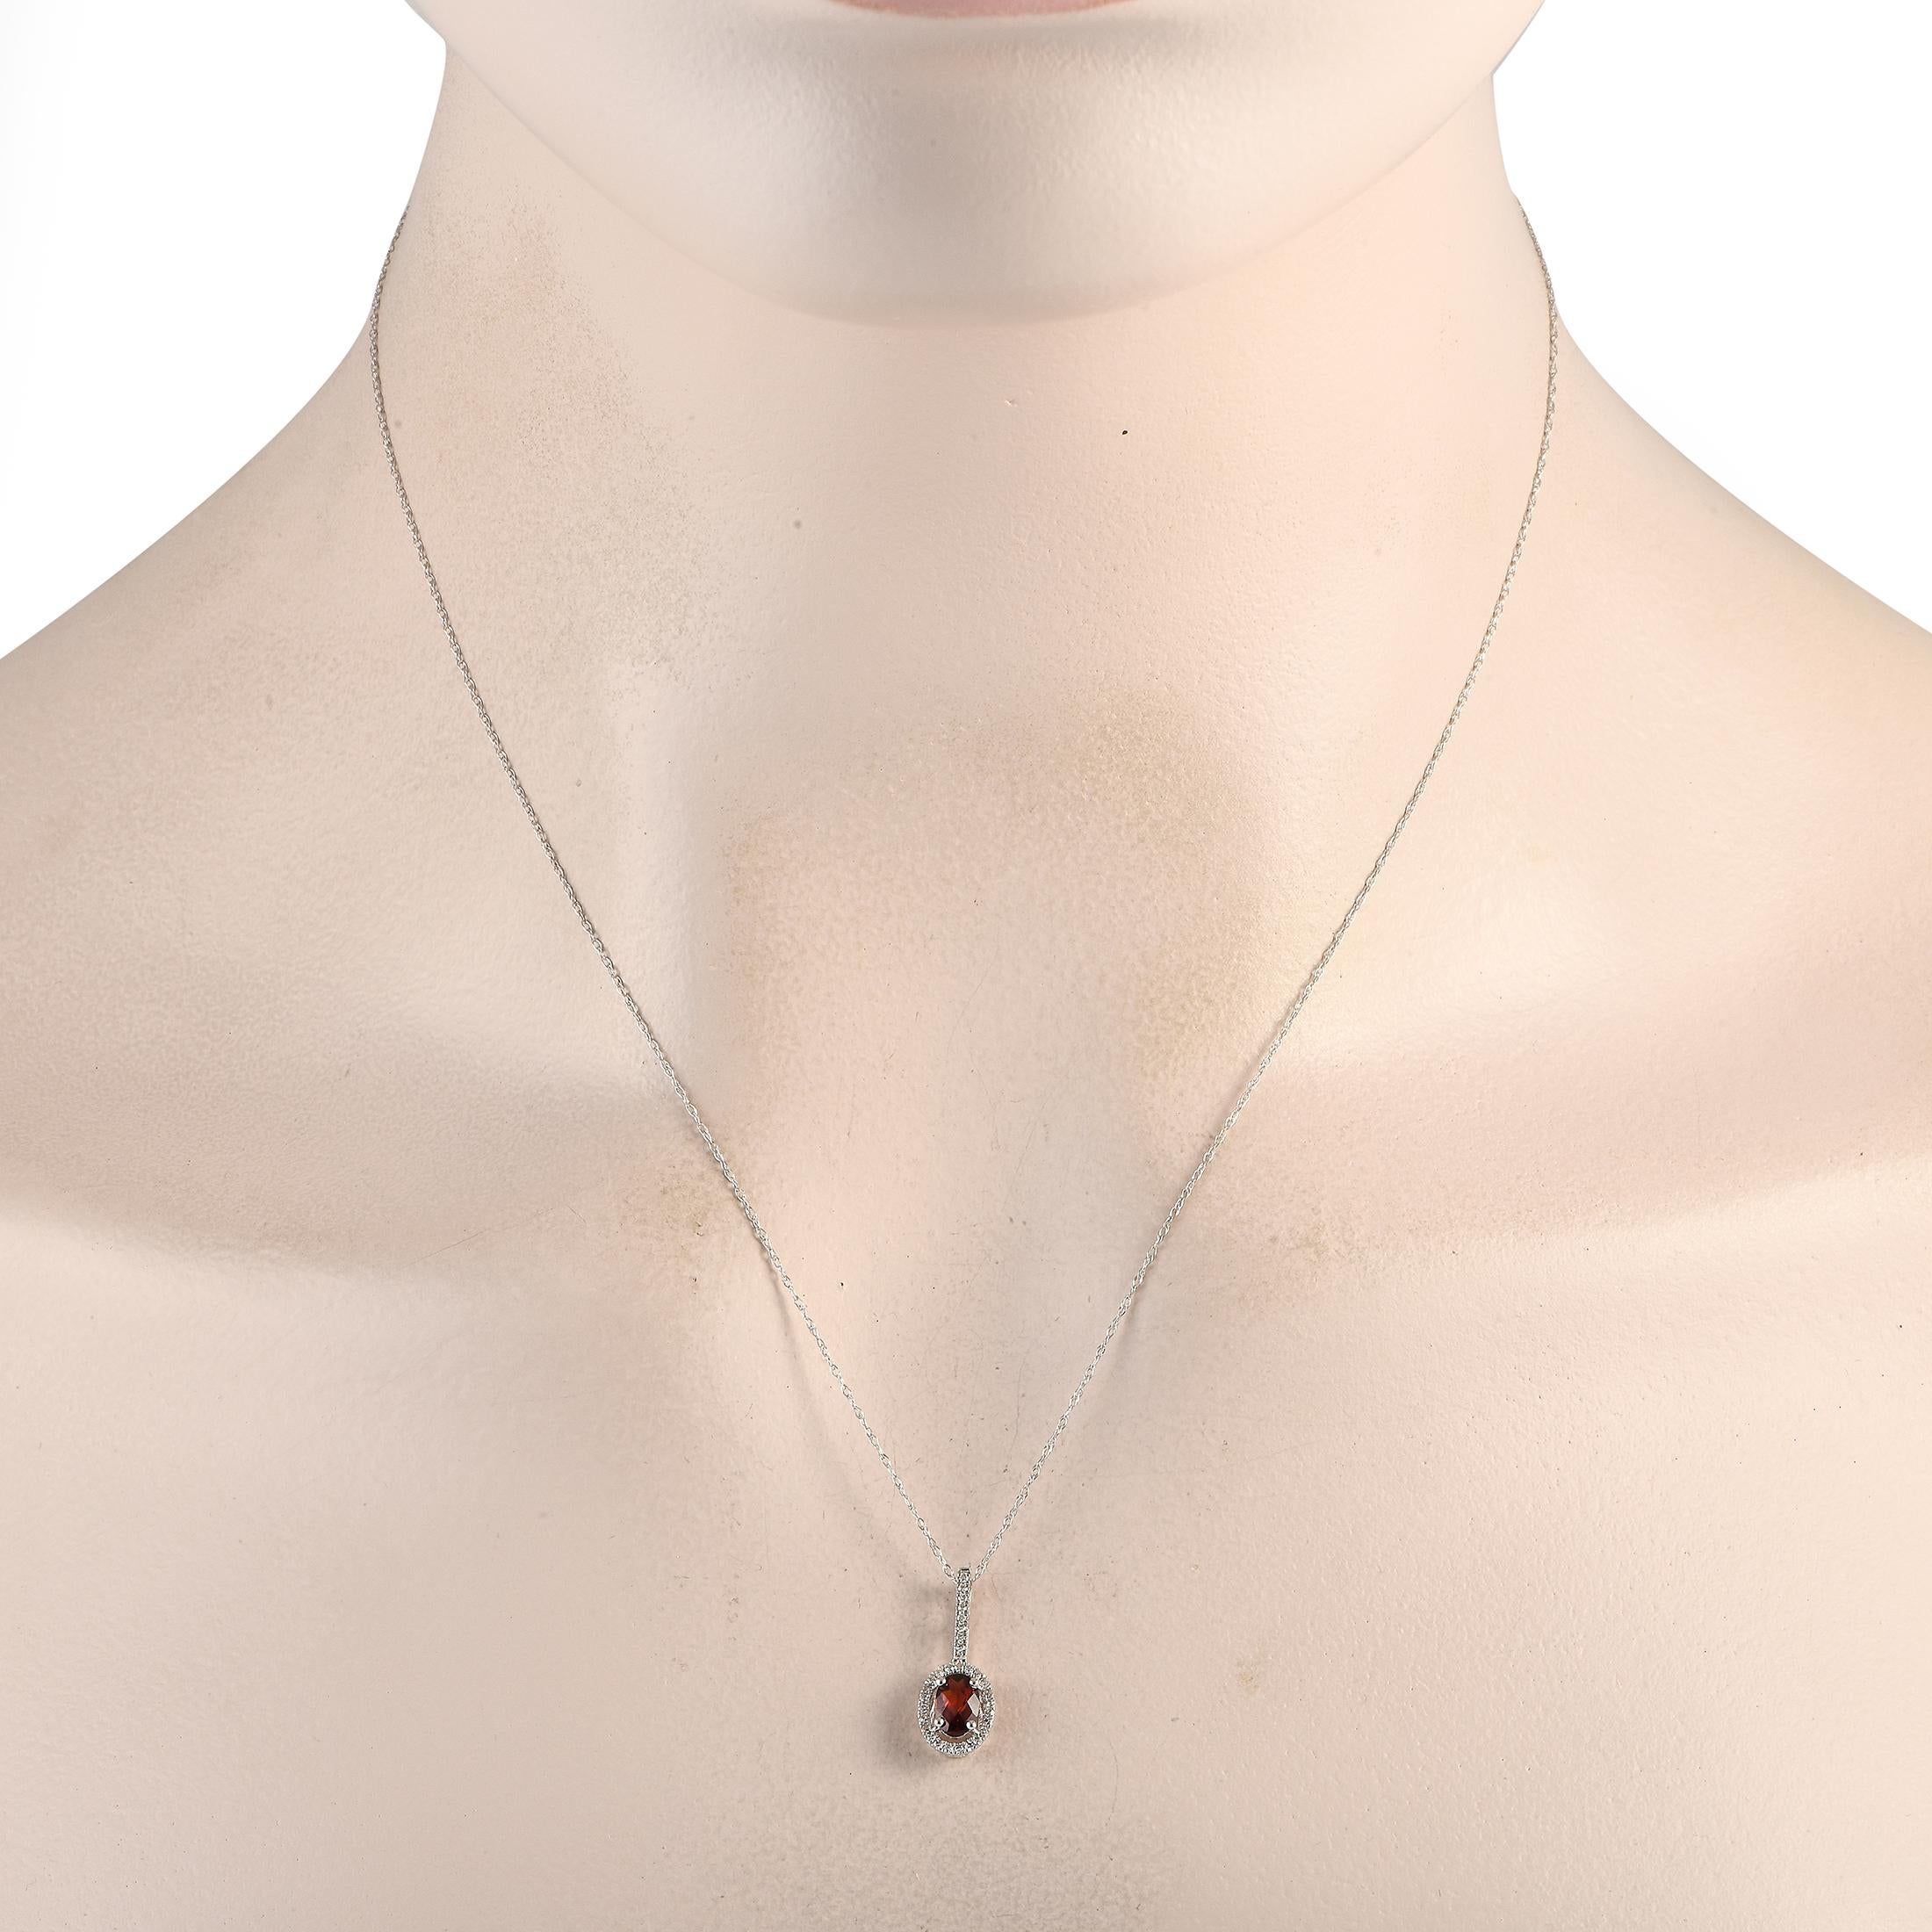 This 14K White Gold necklace will continually make a subtle statement. Suspended from an 18 chain, youll find a sleek pendant measuring 0.75 long by 0.25 wide. It makes a statement thanks to a stunning Garnet center stone and sparkling Diamond